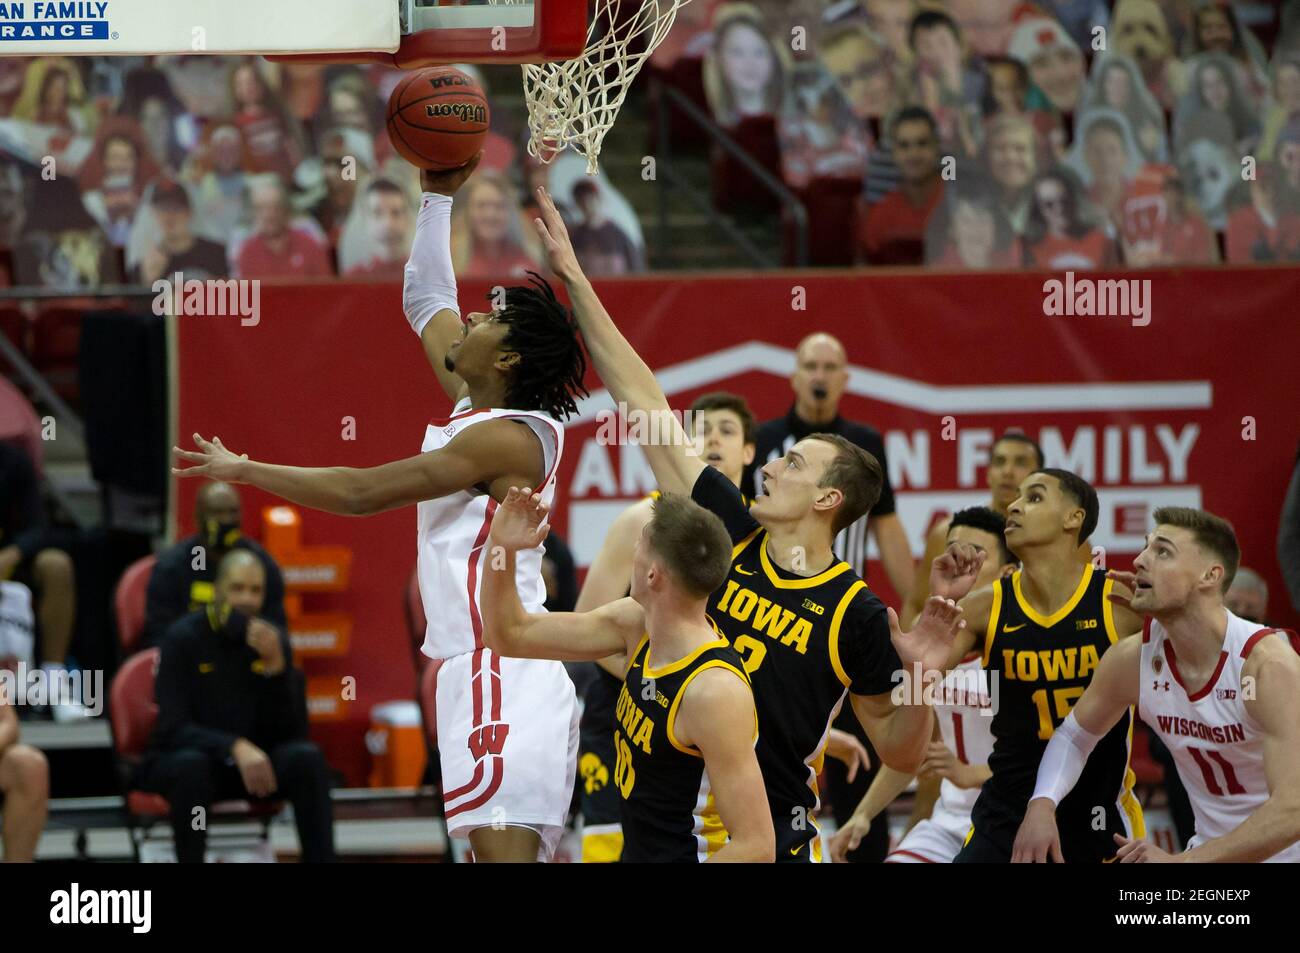 Madison, WI, USA. 18th Feb, 2021. Wisconsin Badgers forward Aleem Ford (2) goes up for a shot under the basket during the NCAA basketball game between the Iowa Hawkeyes and the Wisconsin Badgers at the Kohl Center in Madison, WI. John Fisher/CSM/Alamy Live News Stock Photo